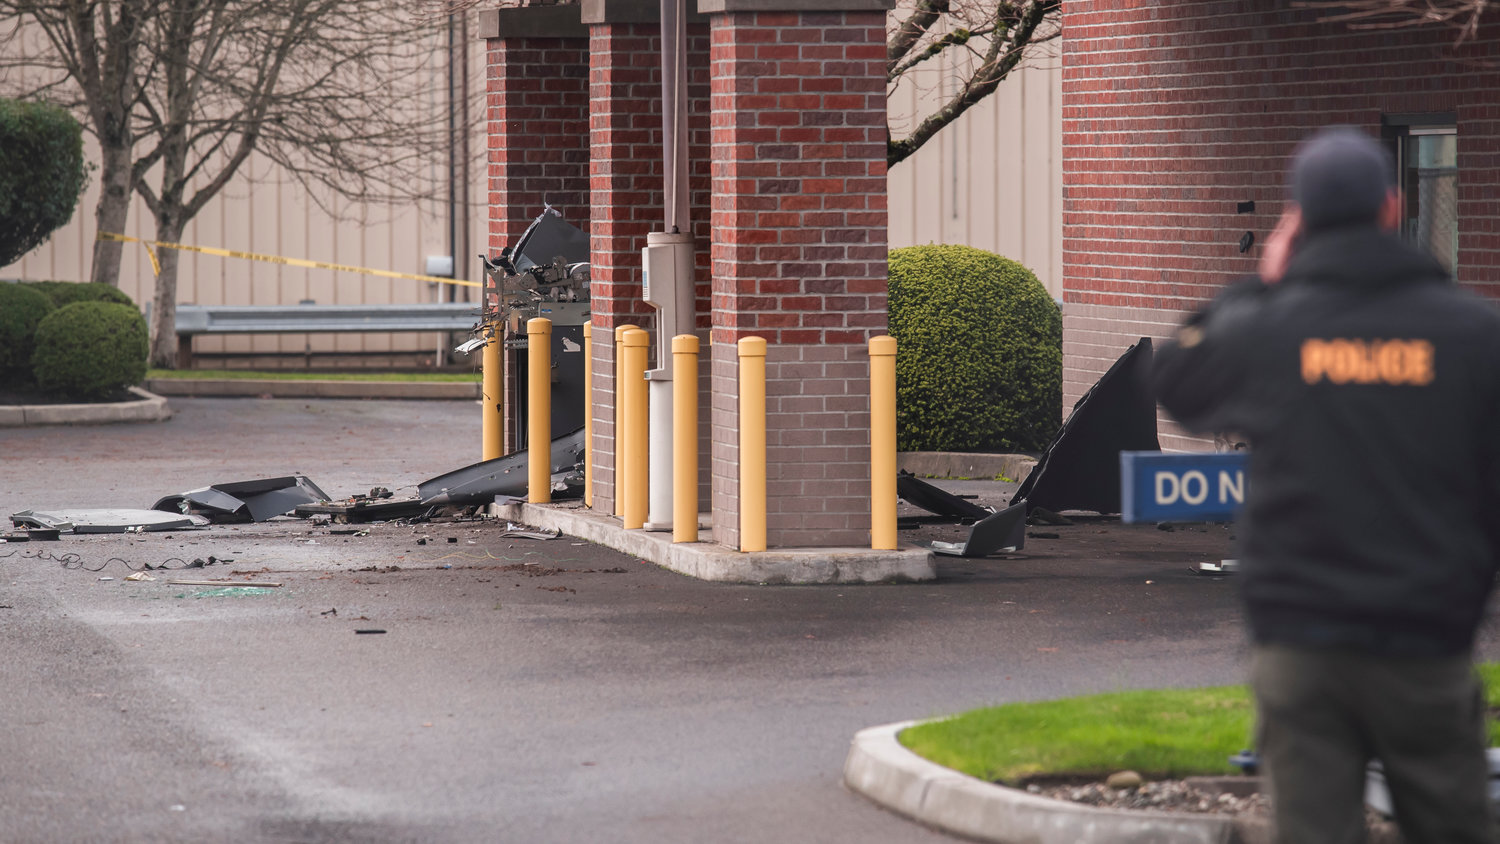 Debris is seen scattered in an area where an ATM once stood outside the 1st Security Bank in Centralia after reports of an explosion in the area last month.